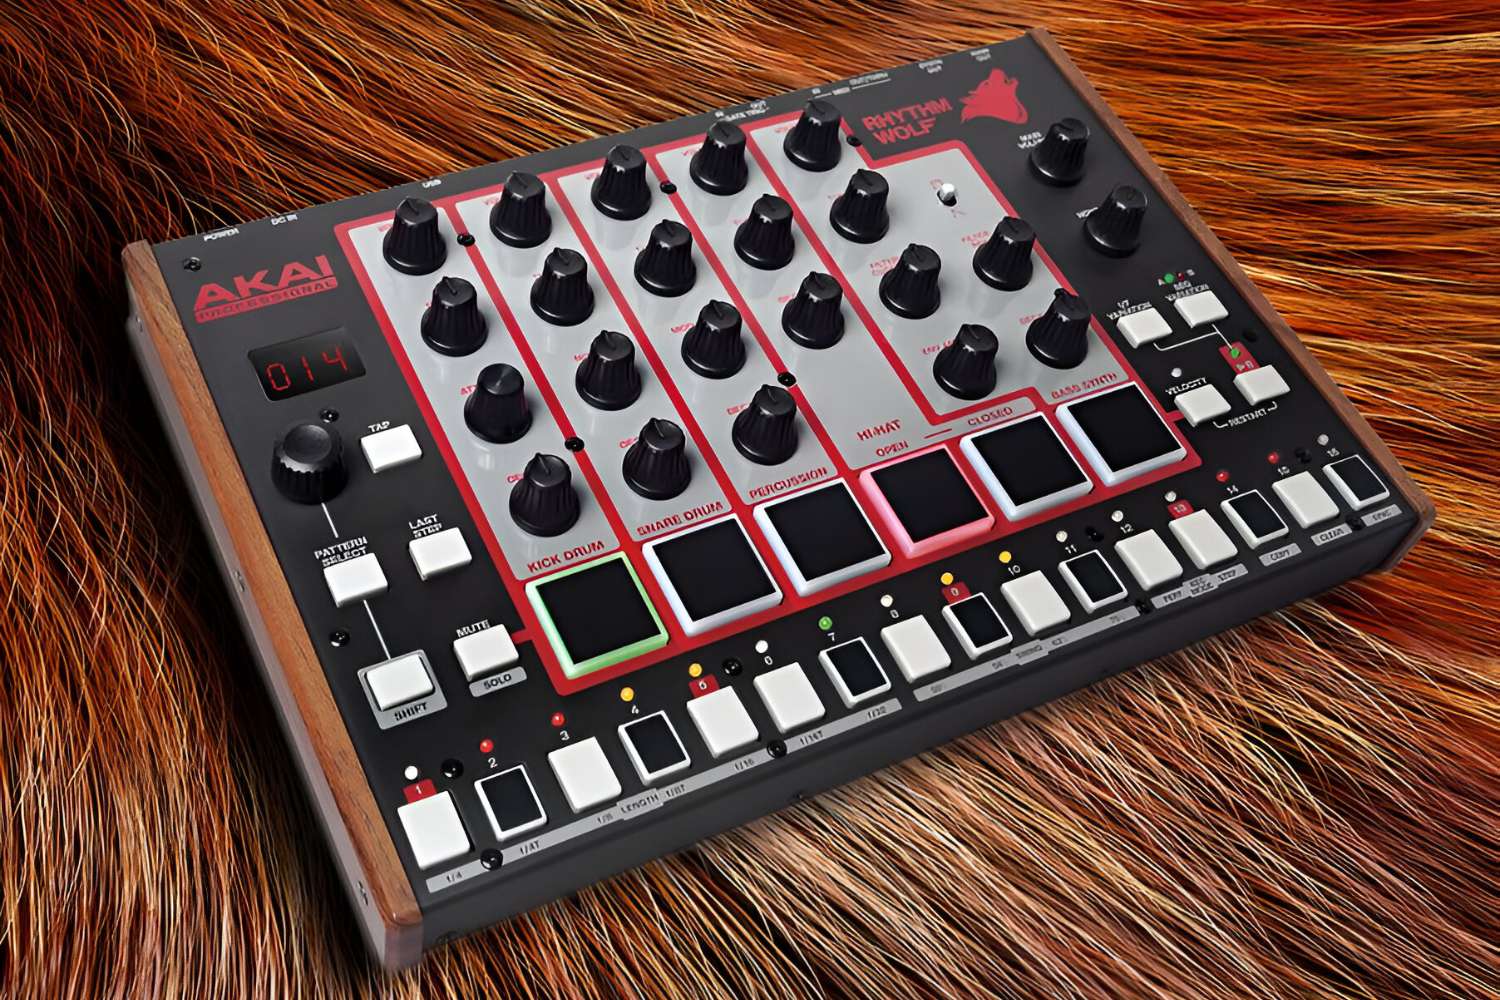 What Can You Do With The Akai Rhythm Wolf Drum Machine